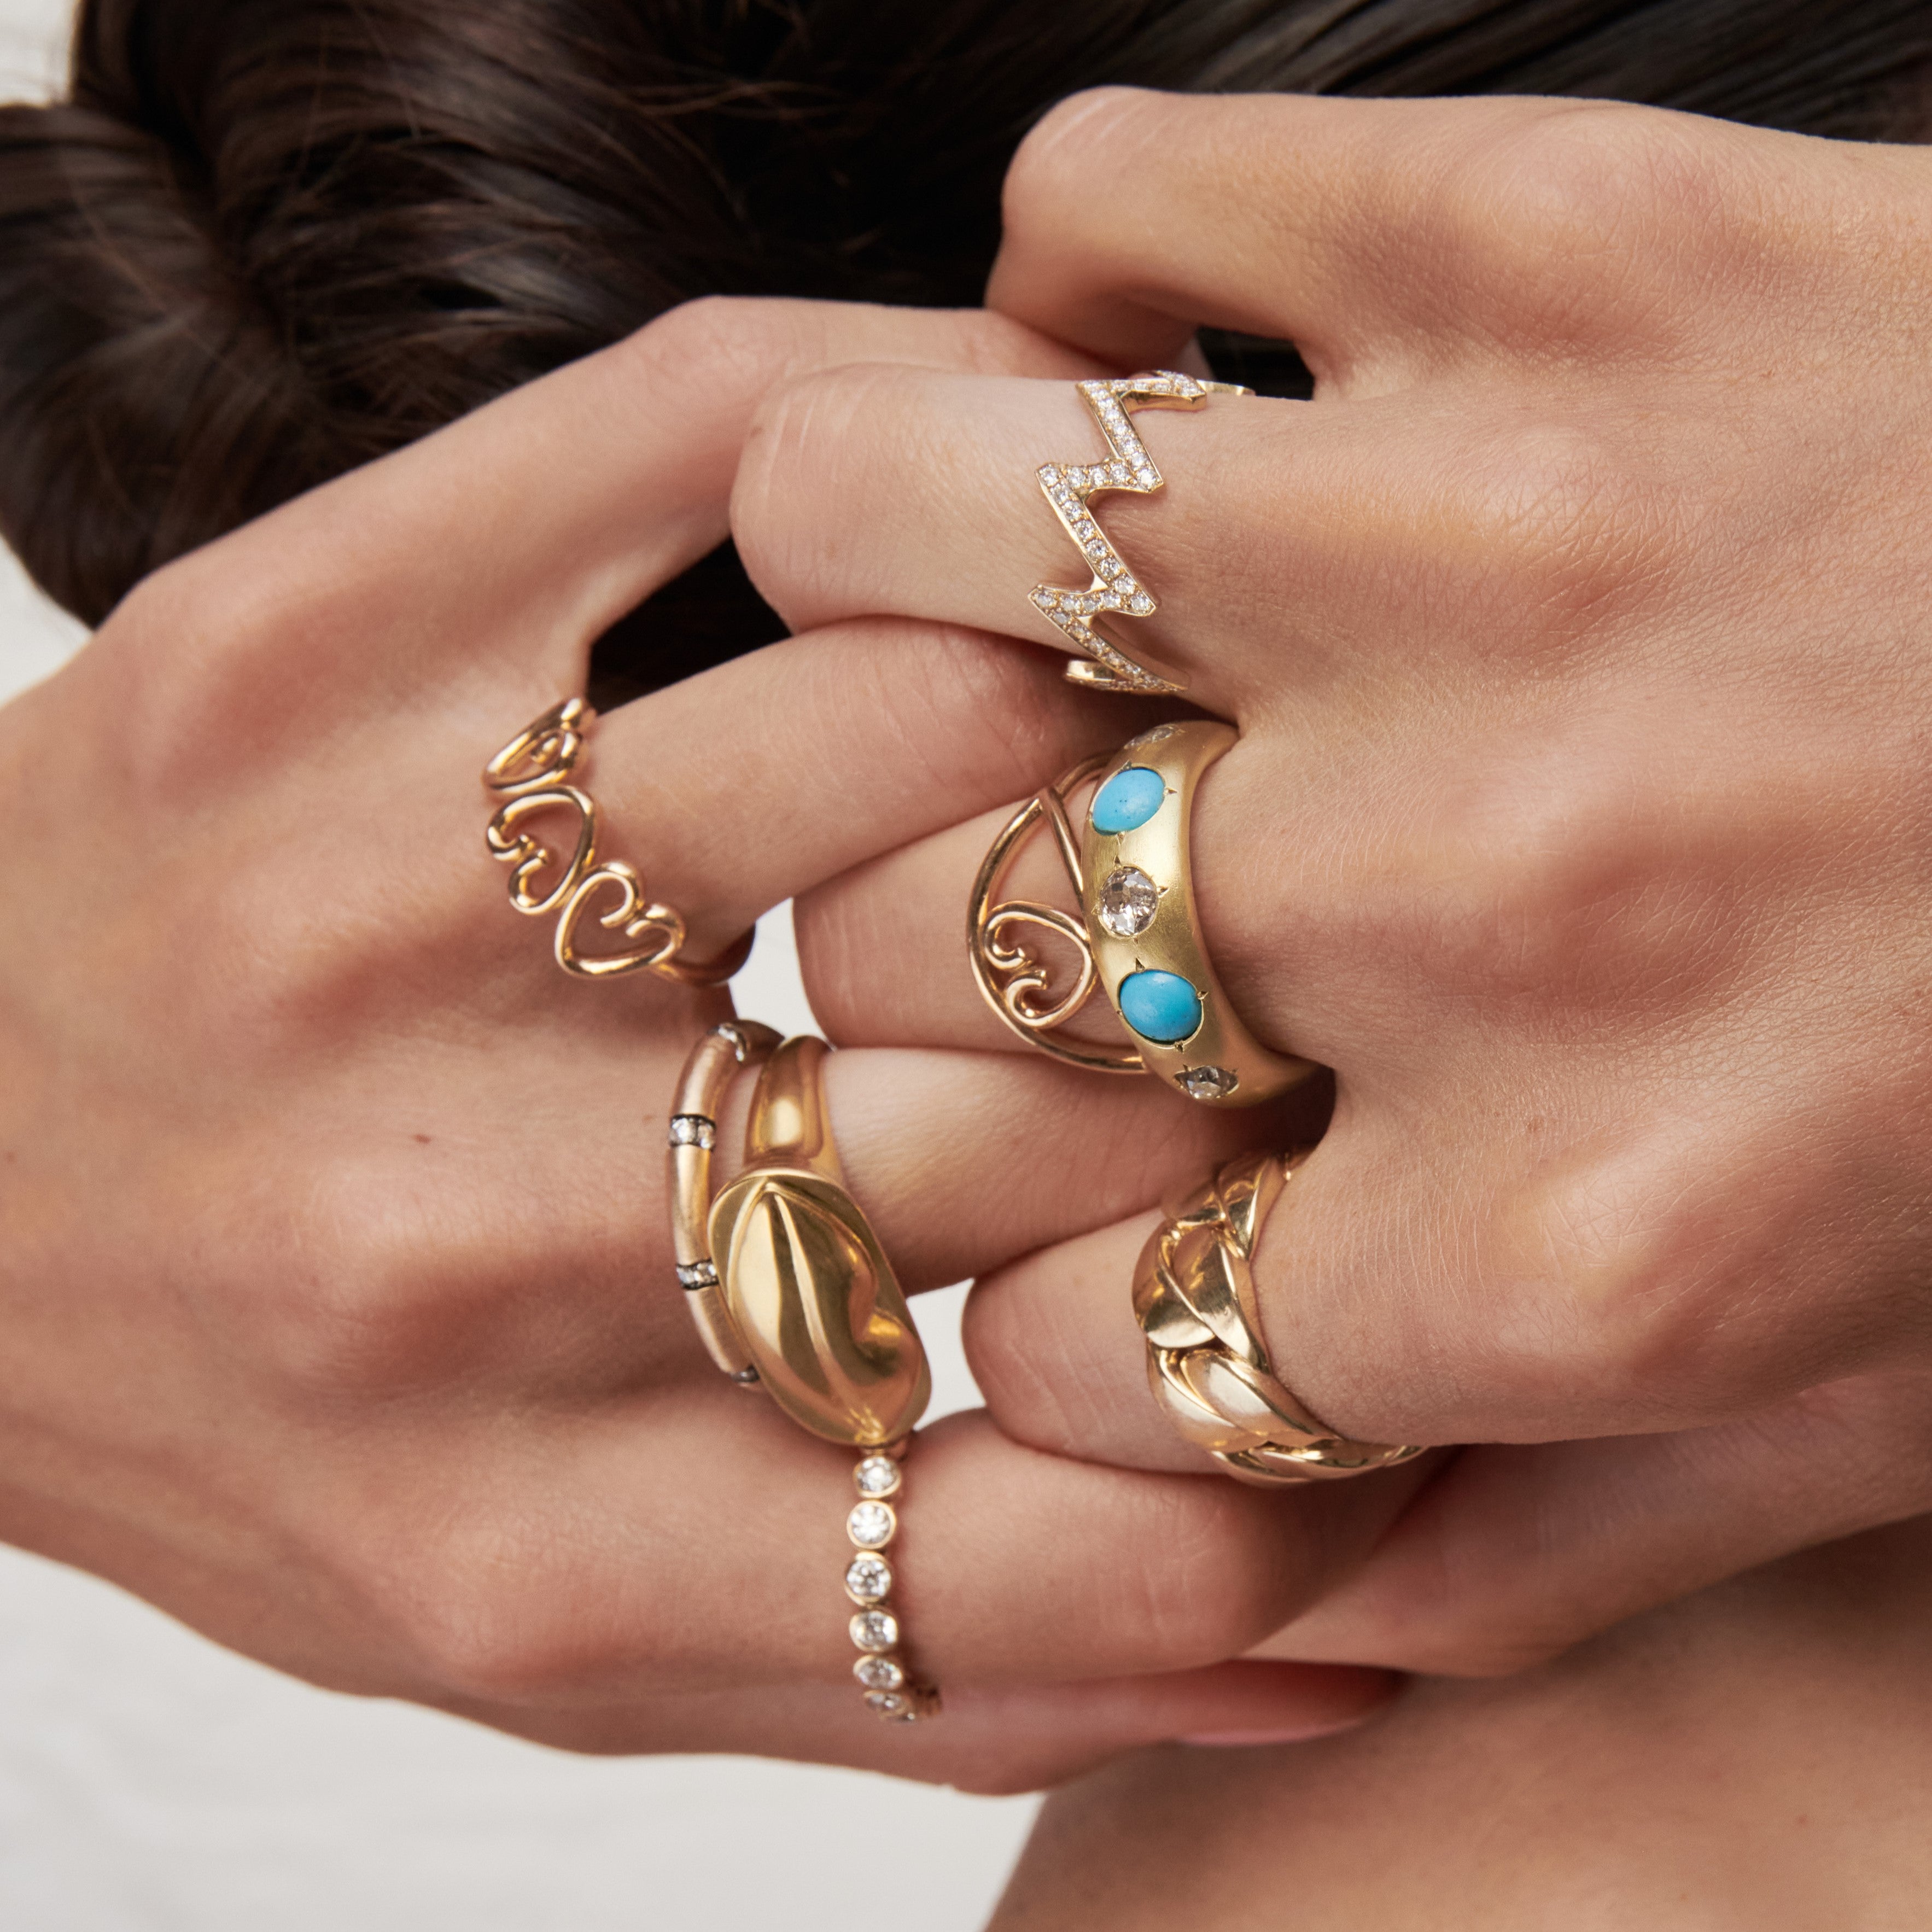 A woman's hands are holding a satin finish Jenna Blake gold band Gypsy Ring and a turquoise Gypsy Ring.